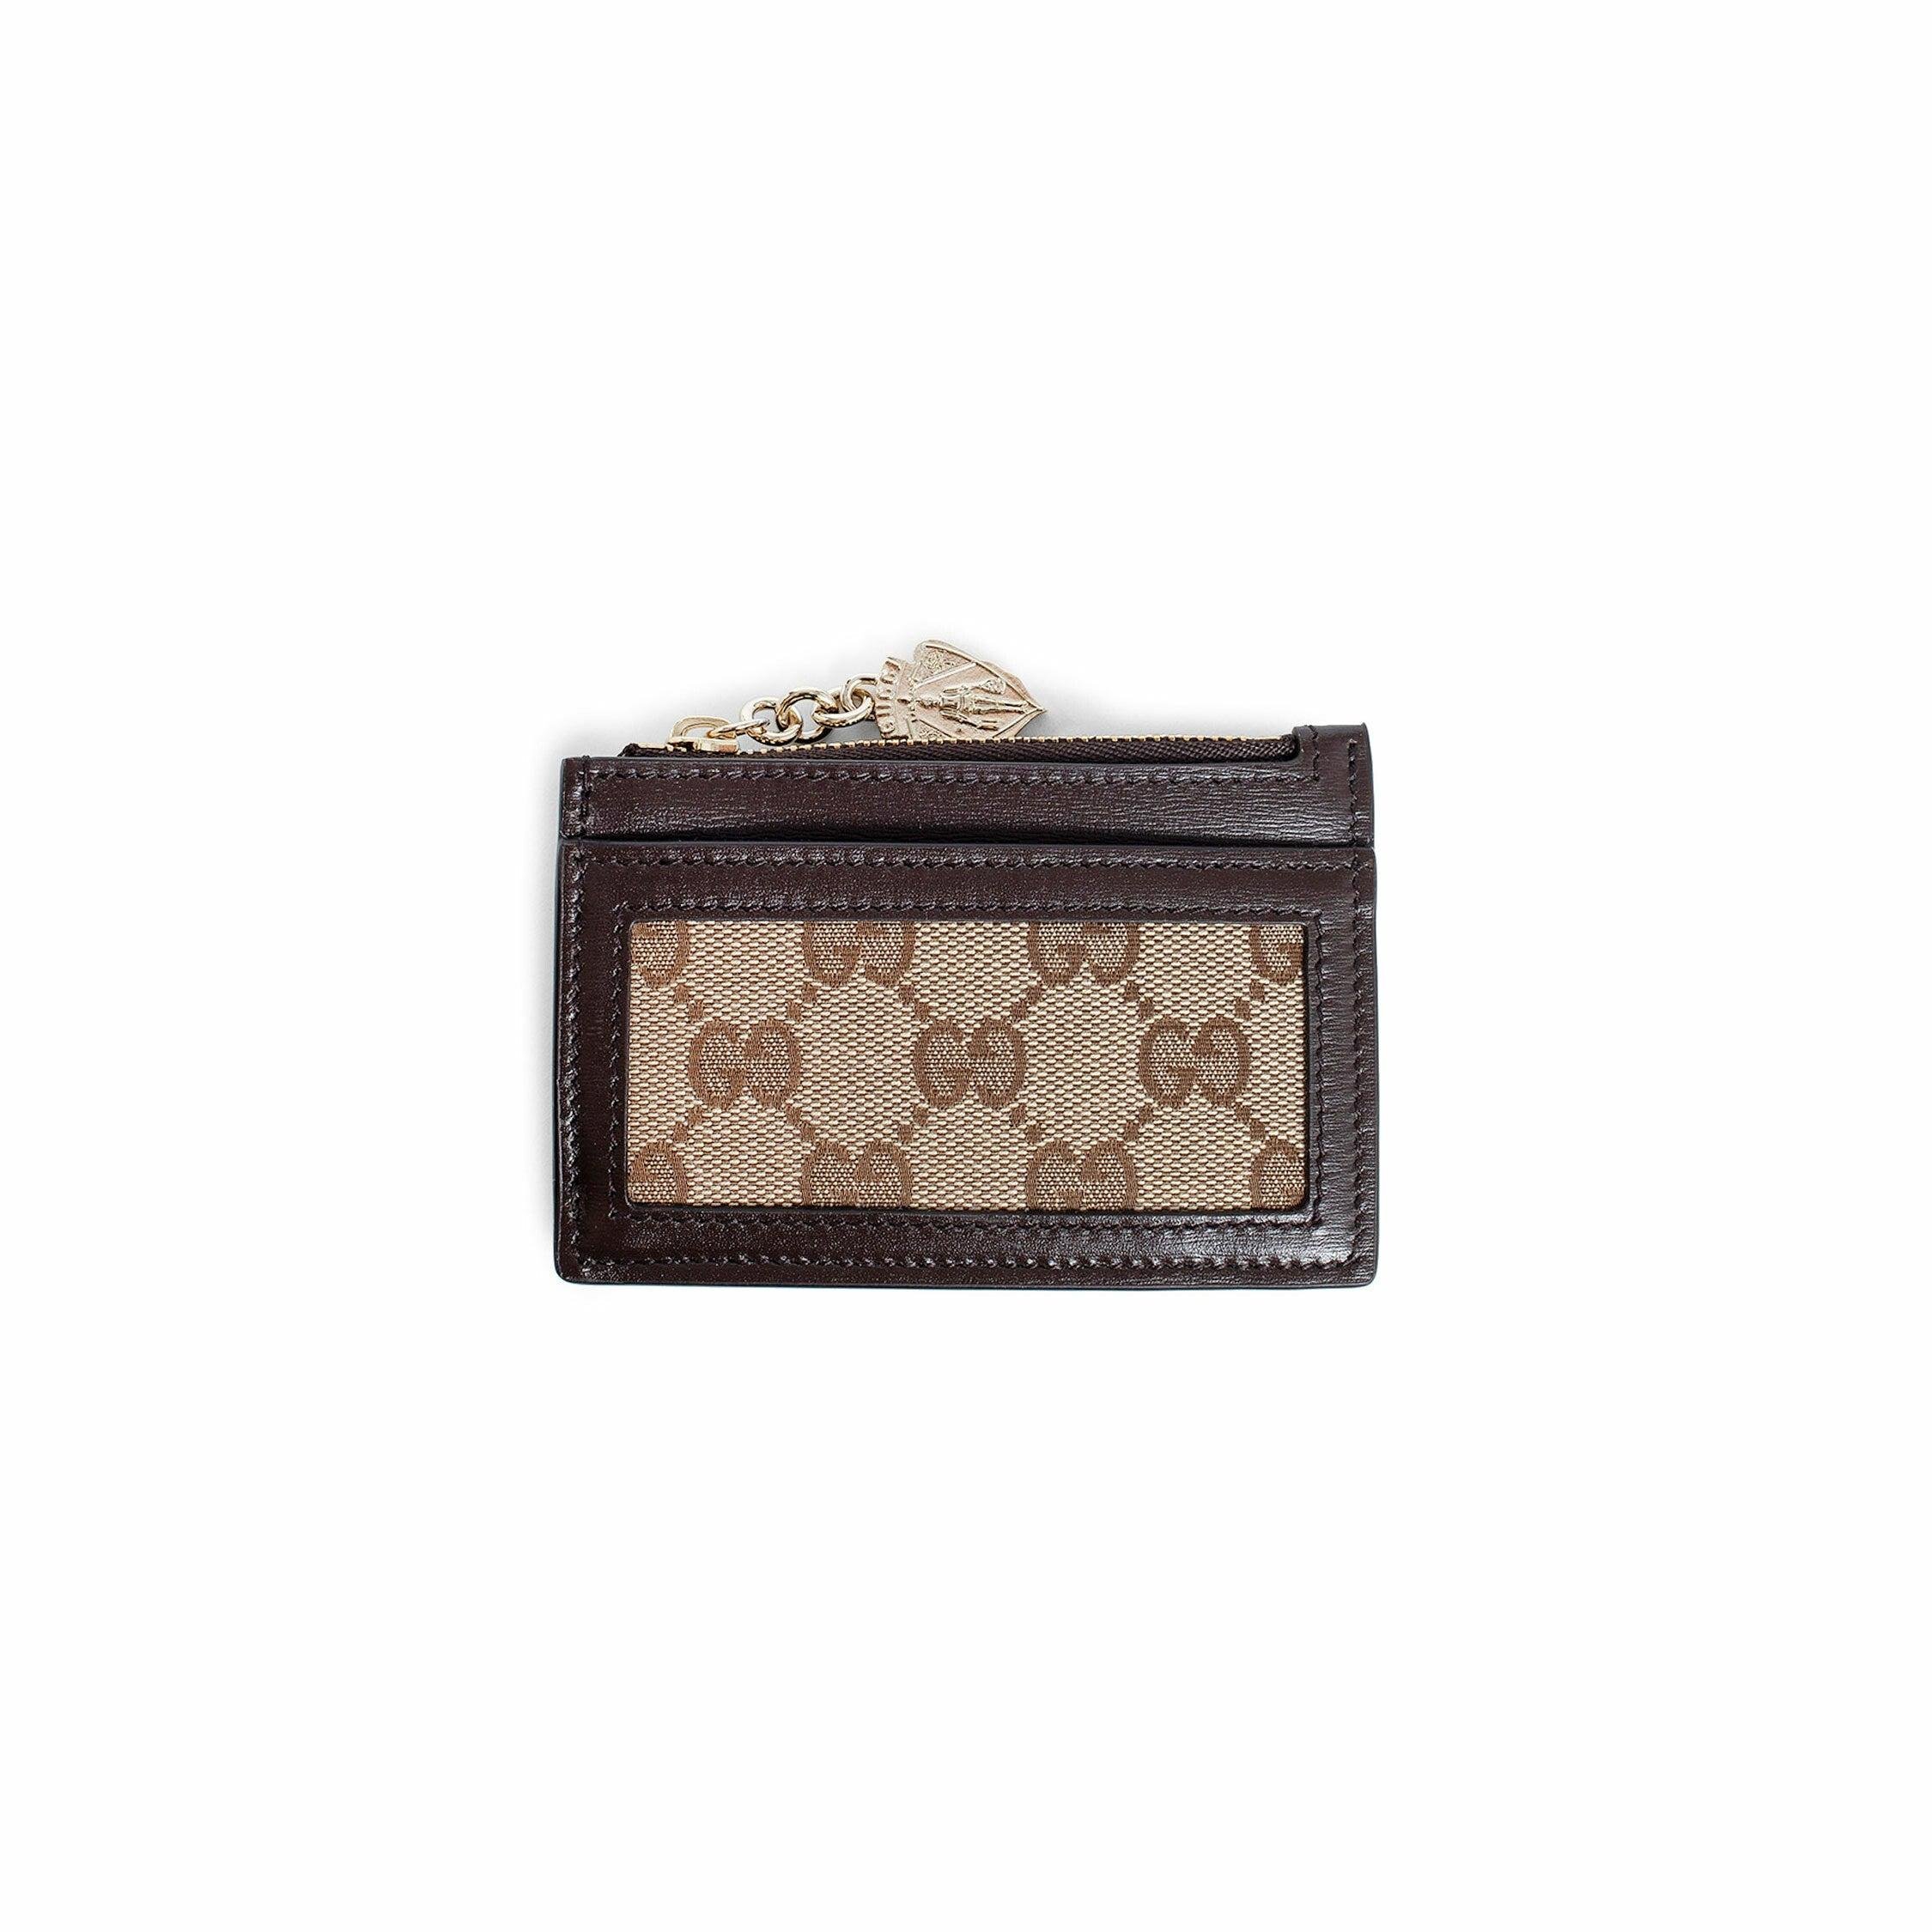 GUCCI WOMAN BEIGE WALLETS & CARDHOLDERS by GUCCI